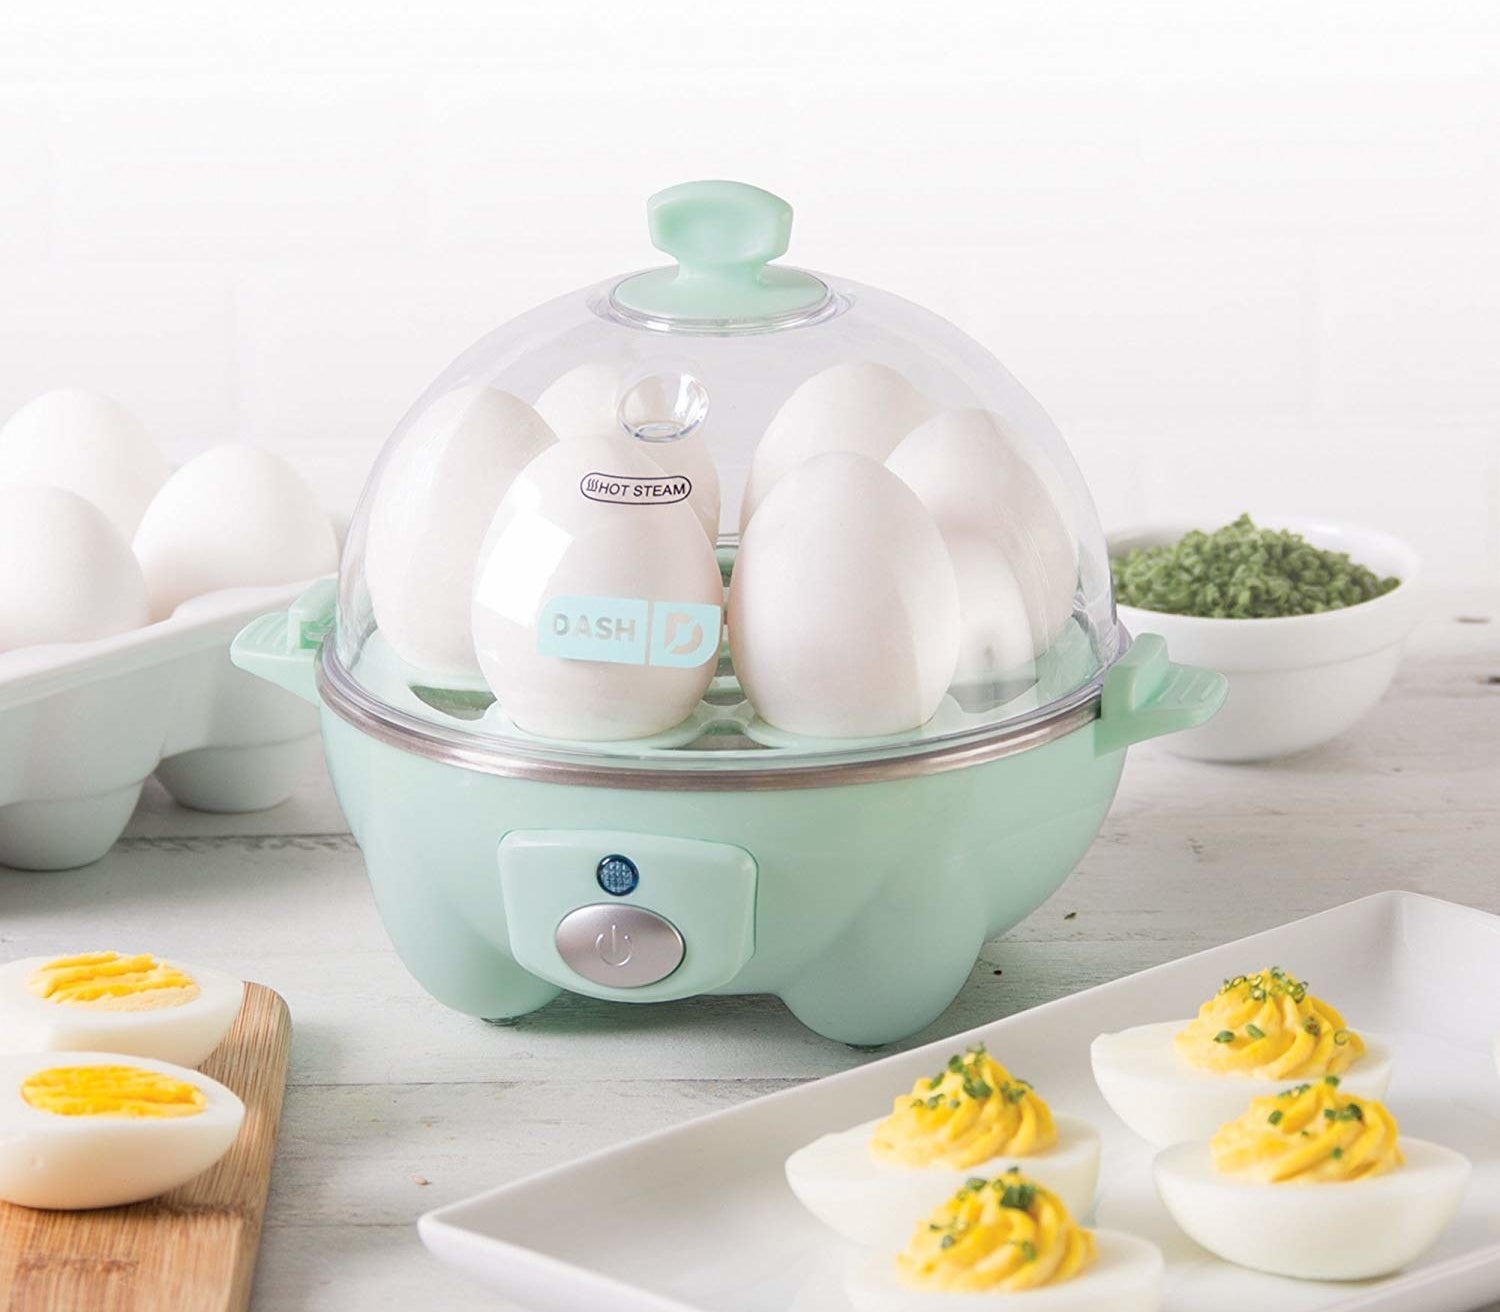 The dome-shaped egg cooker in aqua